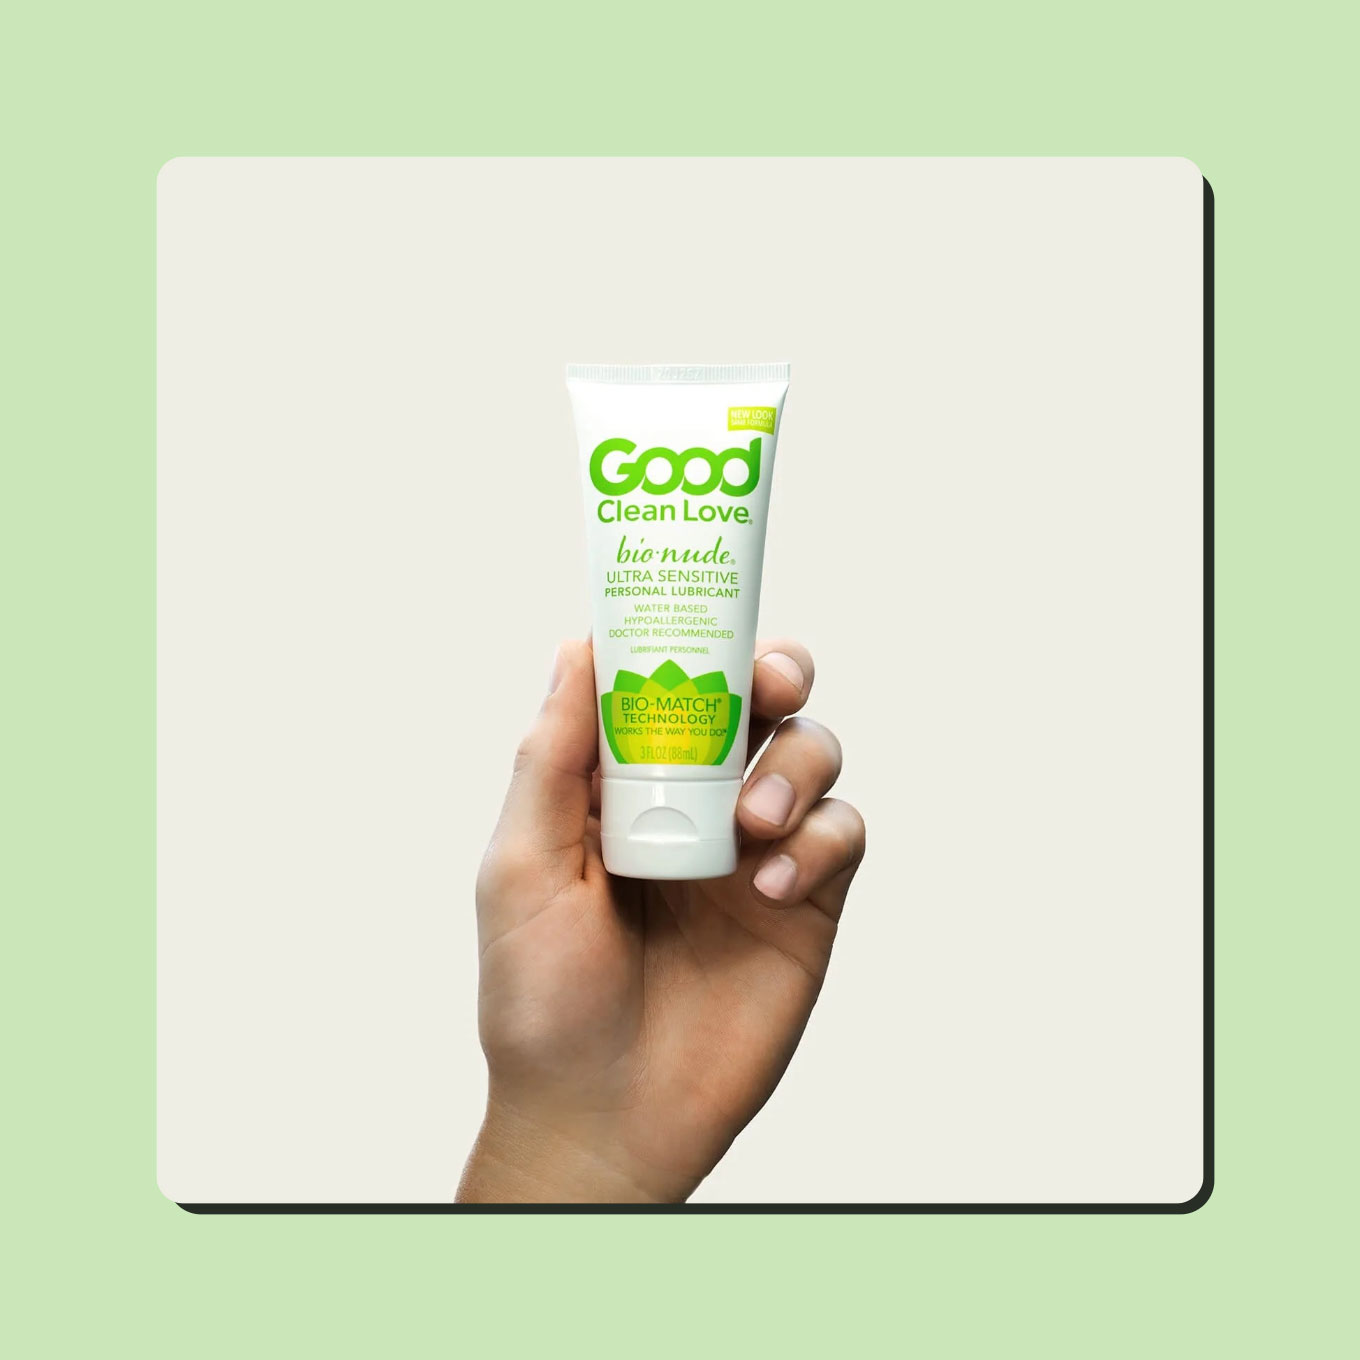 A hand holds up a bottle of Good Clean Love's BioNude lube